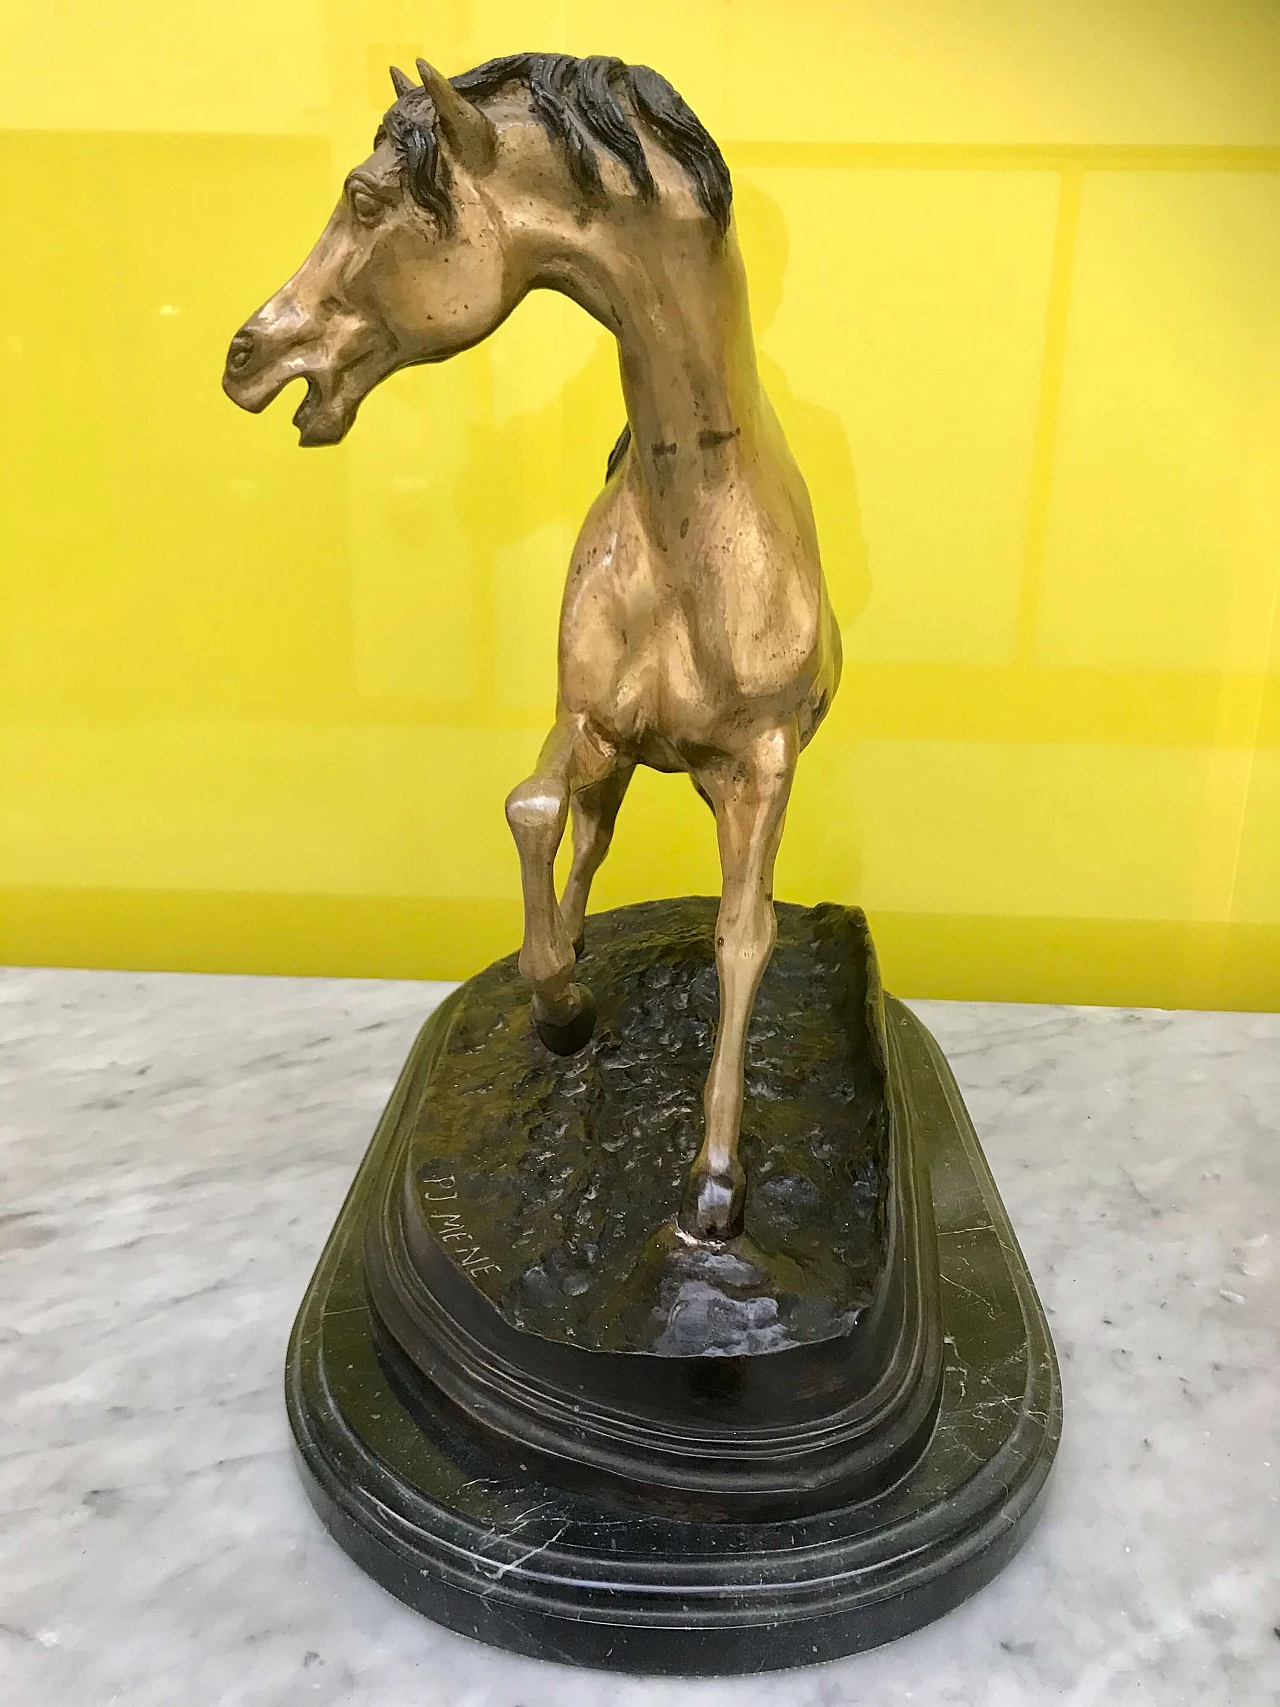 P.J.Mêne, gilded and burnished bronze sculpture of a "Horse" with black marble base, original 19th century 1177729